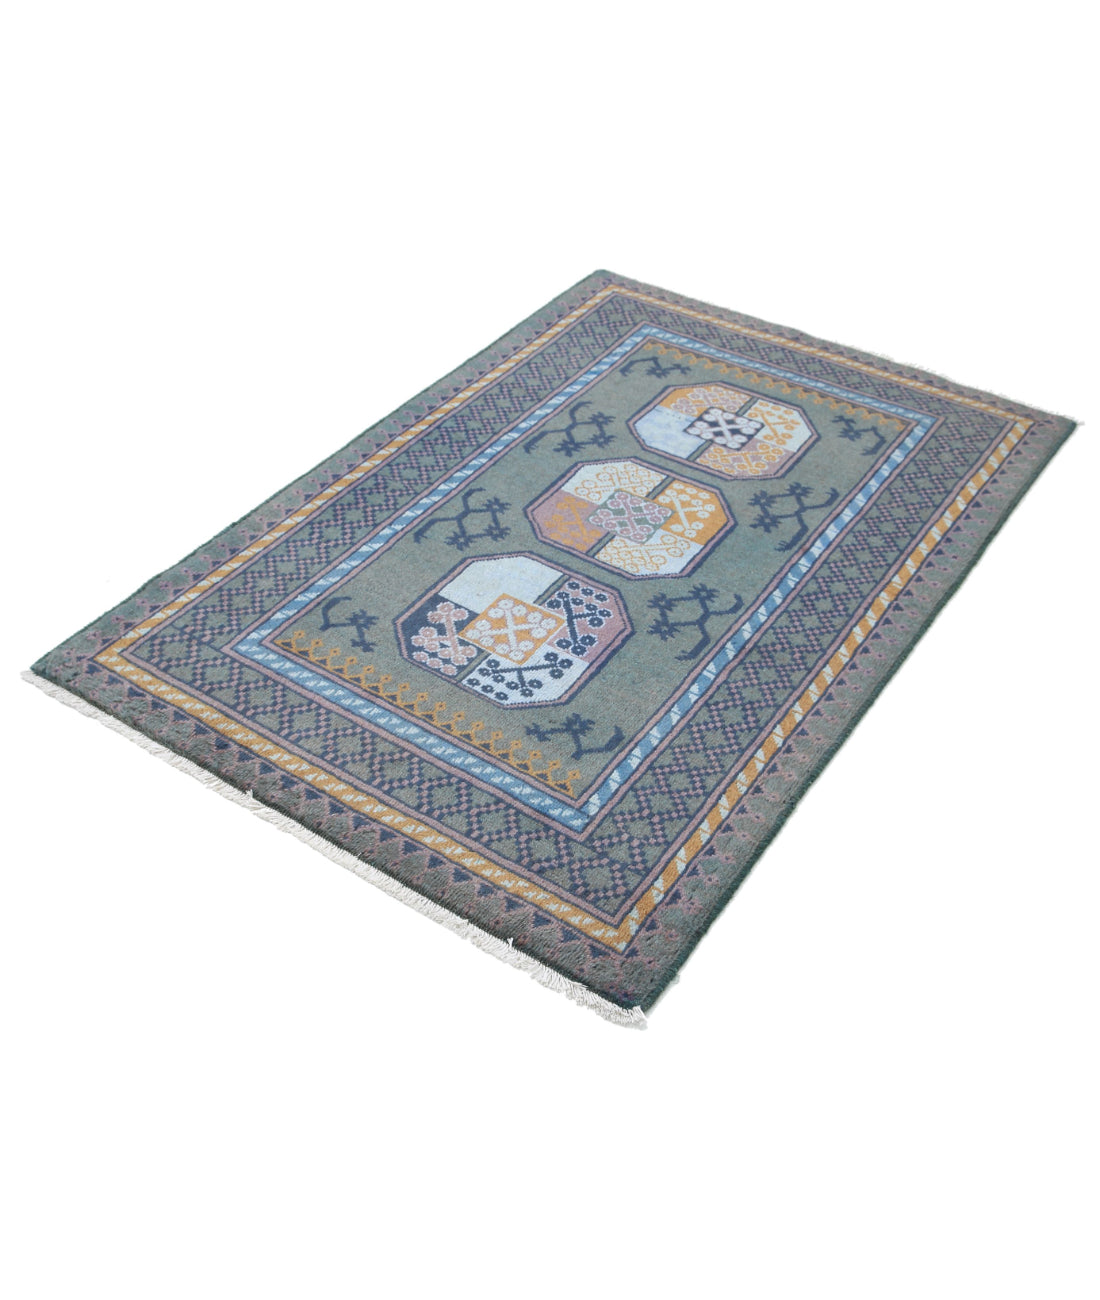 Revival 3'4'' X 4'11'' Hand-Knotted Wool Rug 3'4'' x 4'11'' (100 X 148) / Green / Blue